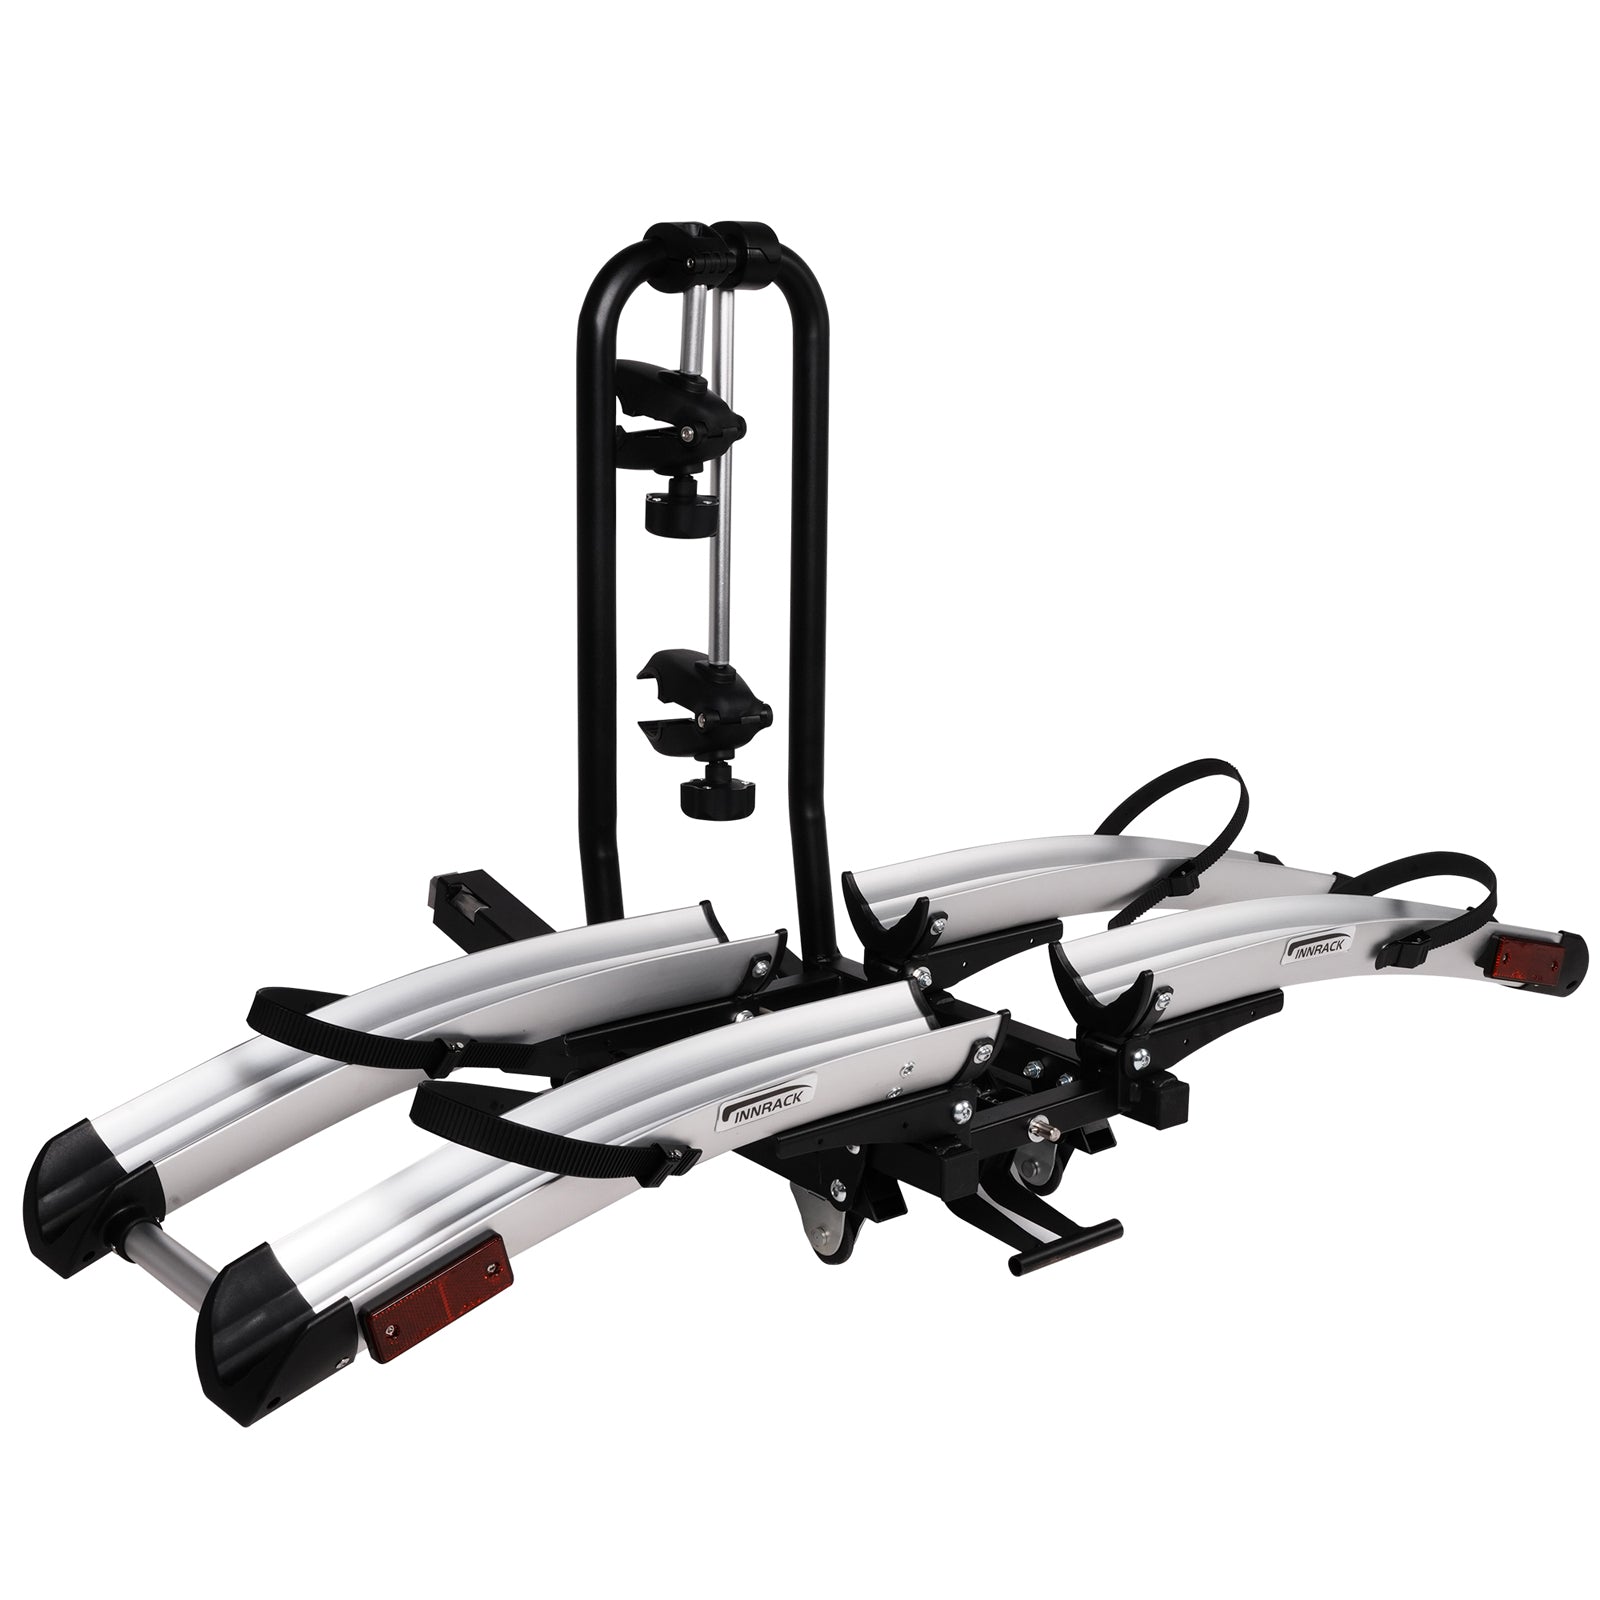 Hitch Bike Rack for 2 Bikes Foldable Platform Style Bicycle Car Racks with Wheels